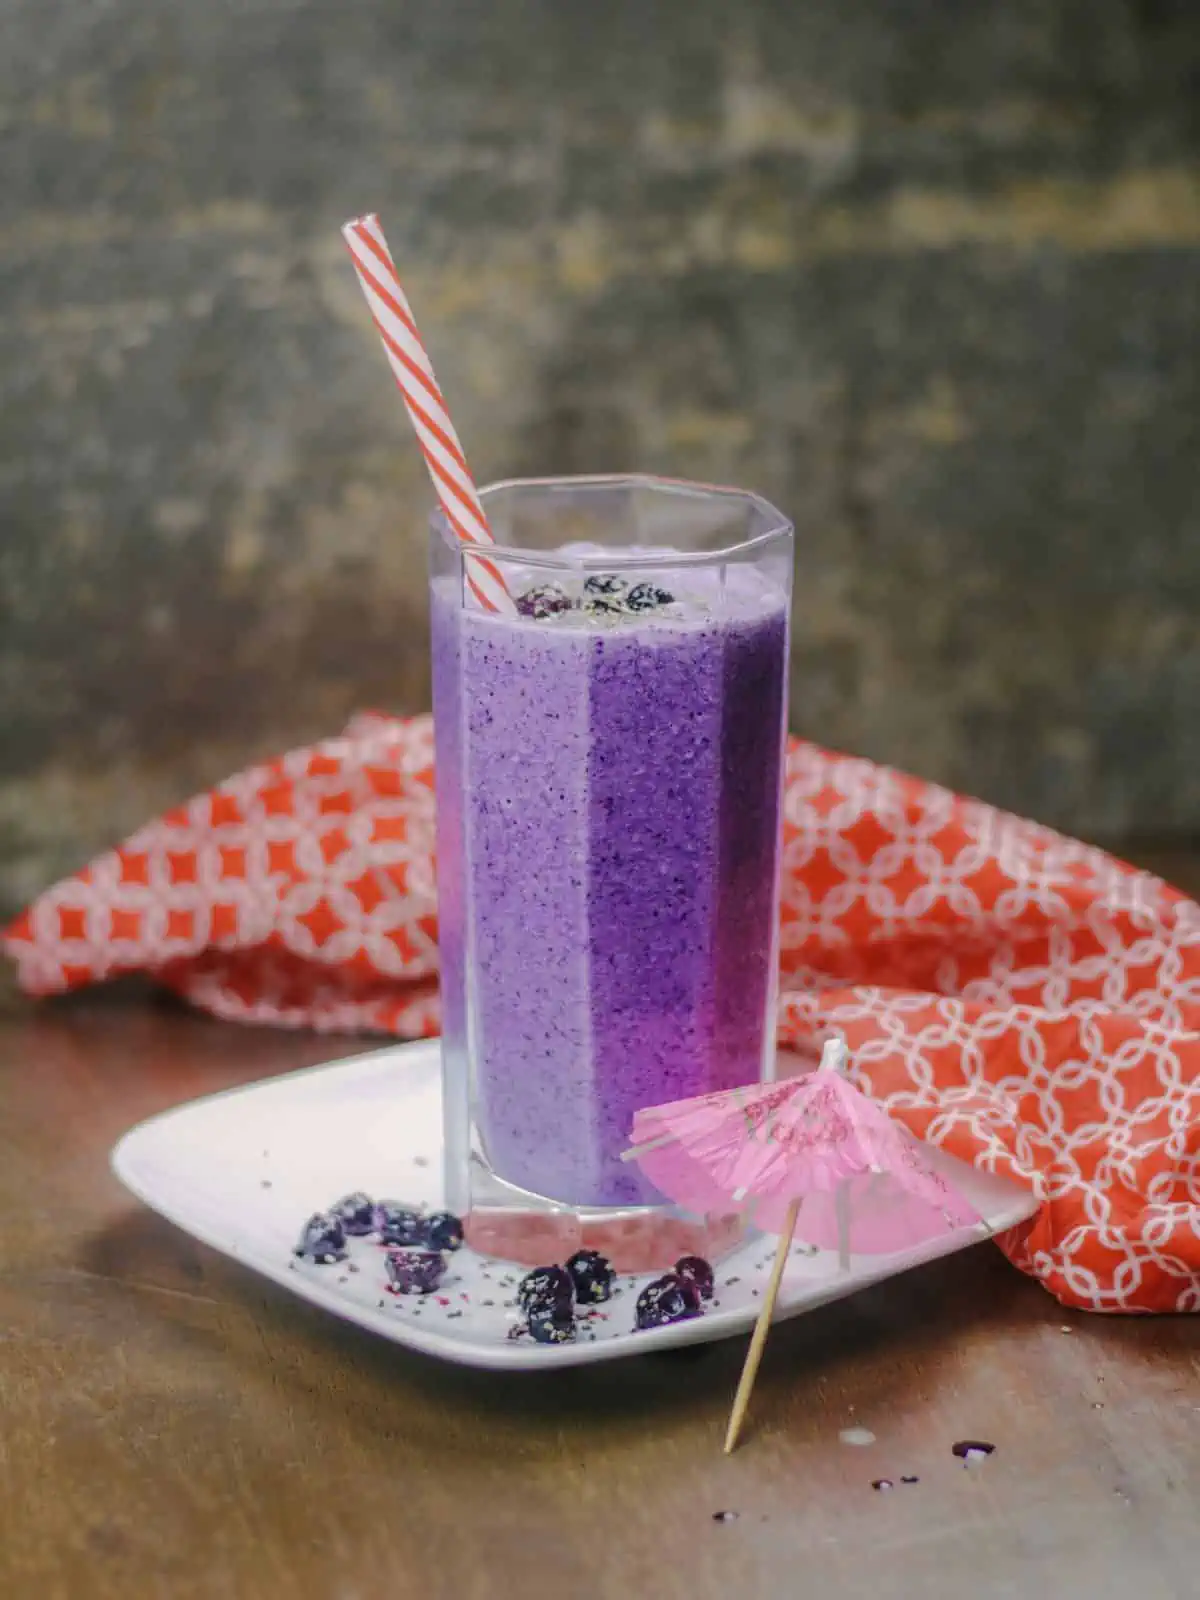 Banana blueberry smoothie in a tall glass with straw and a paper umbrella on the side.